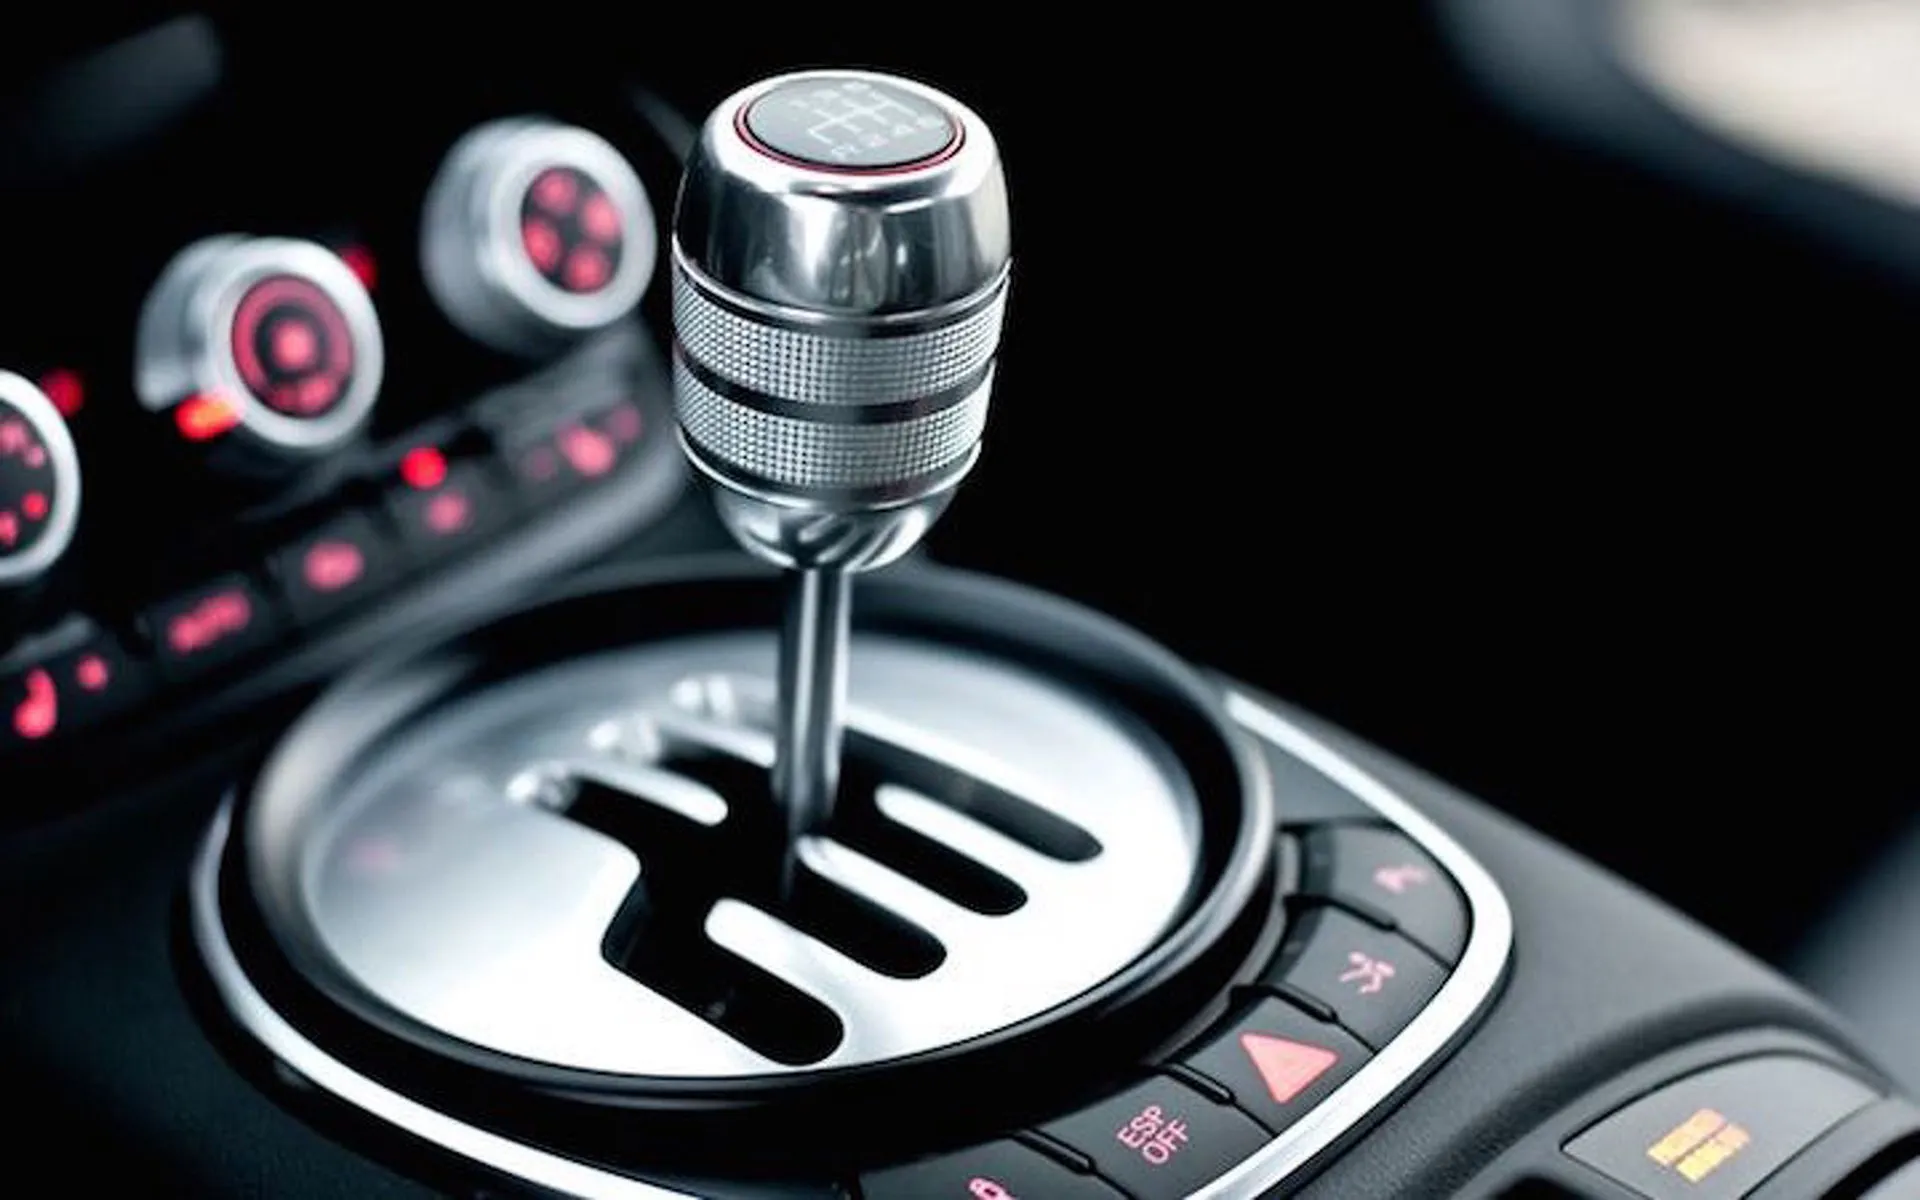 How To Drive Manual Car?